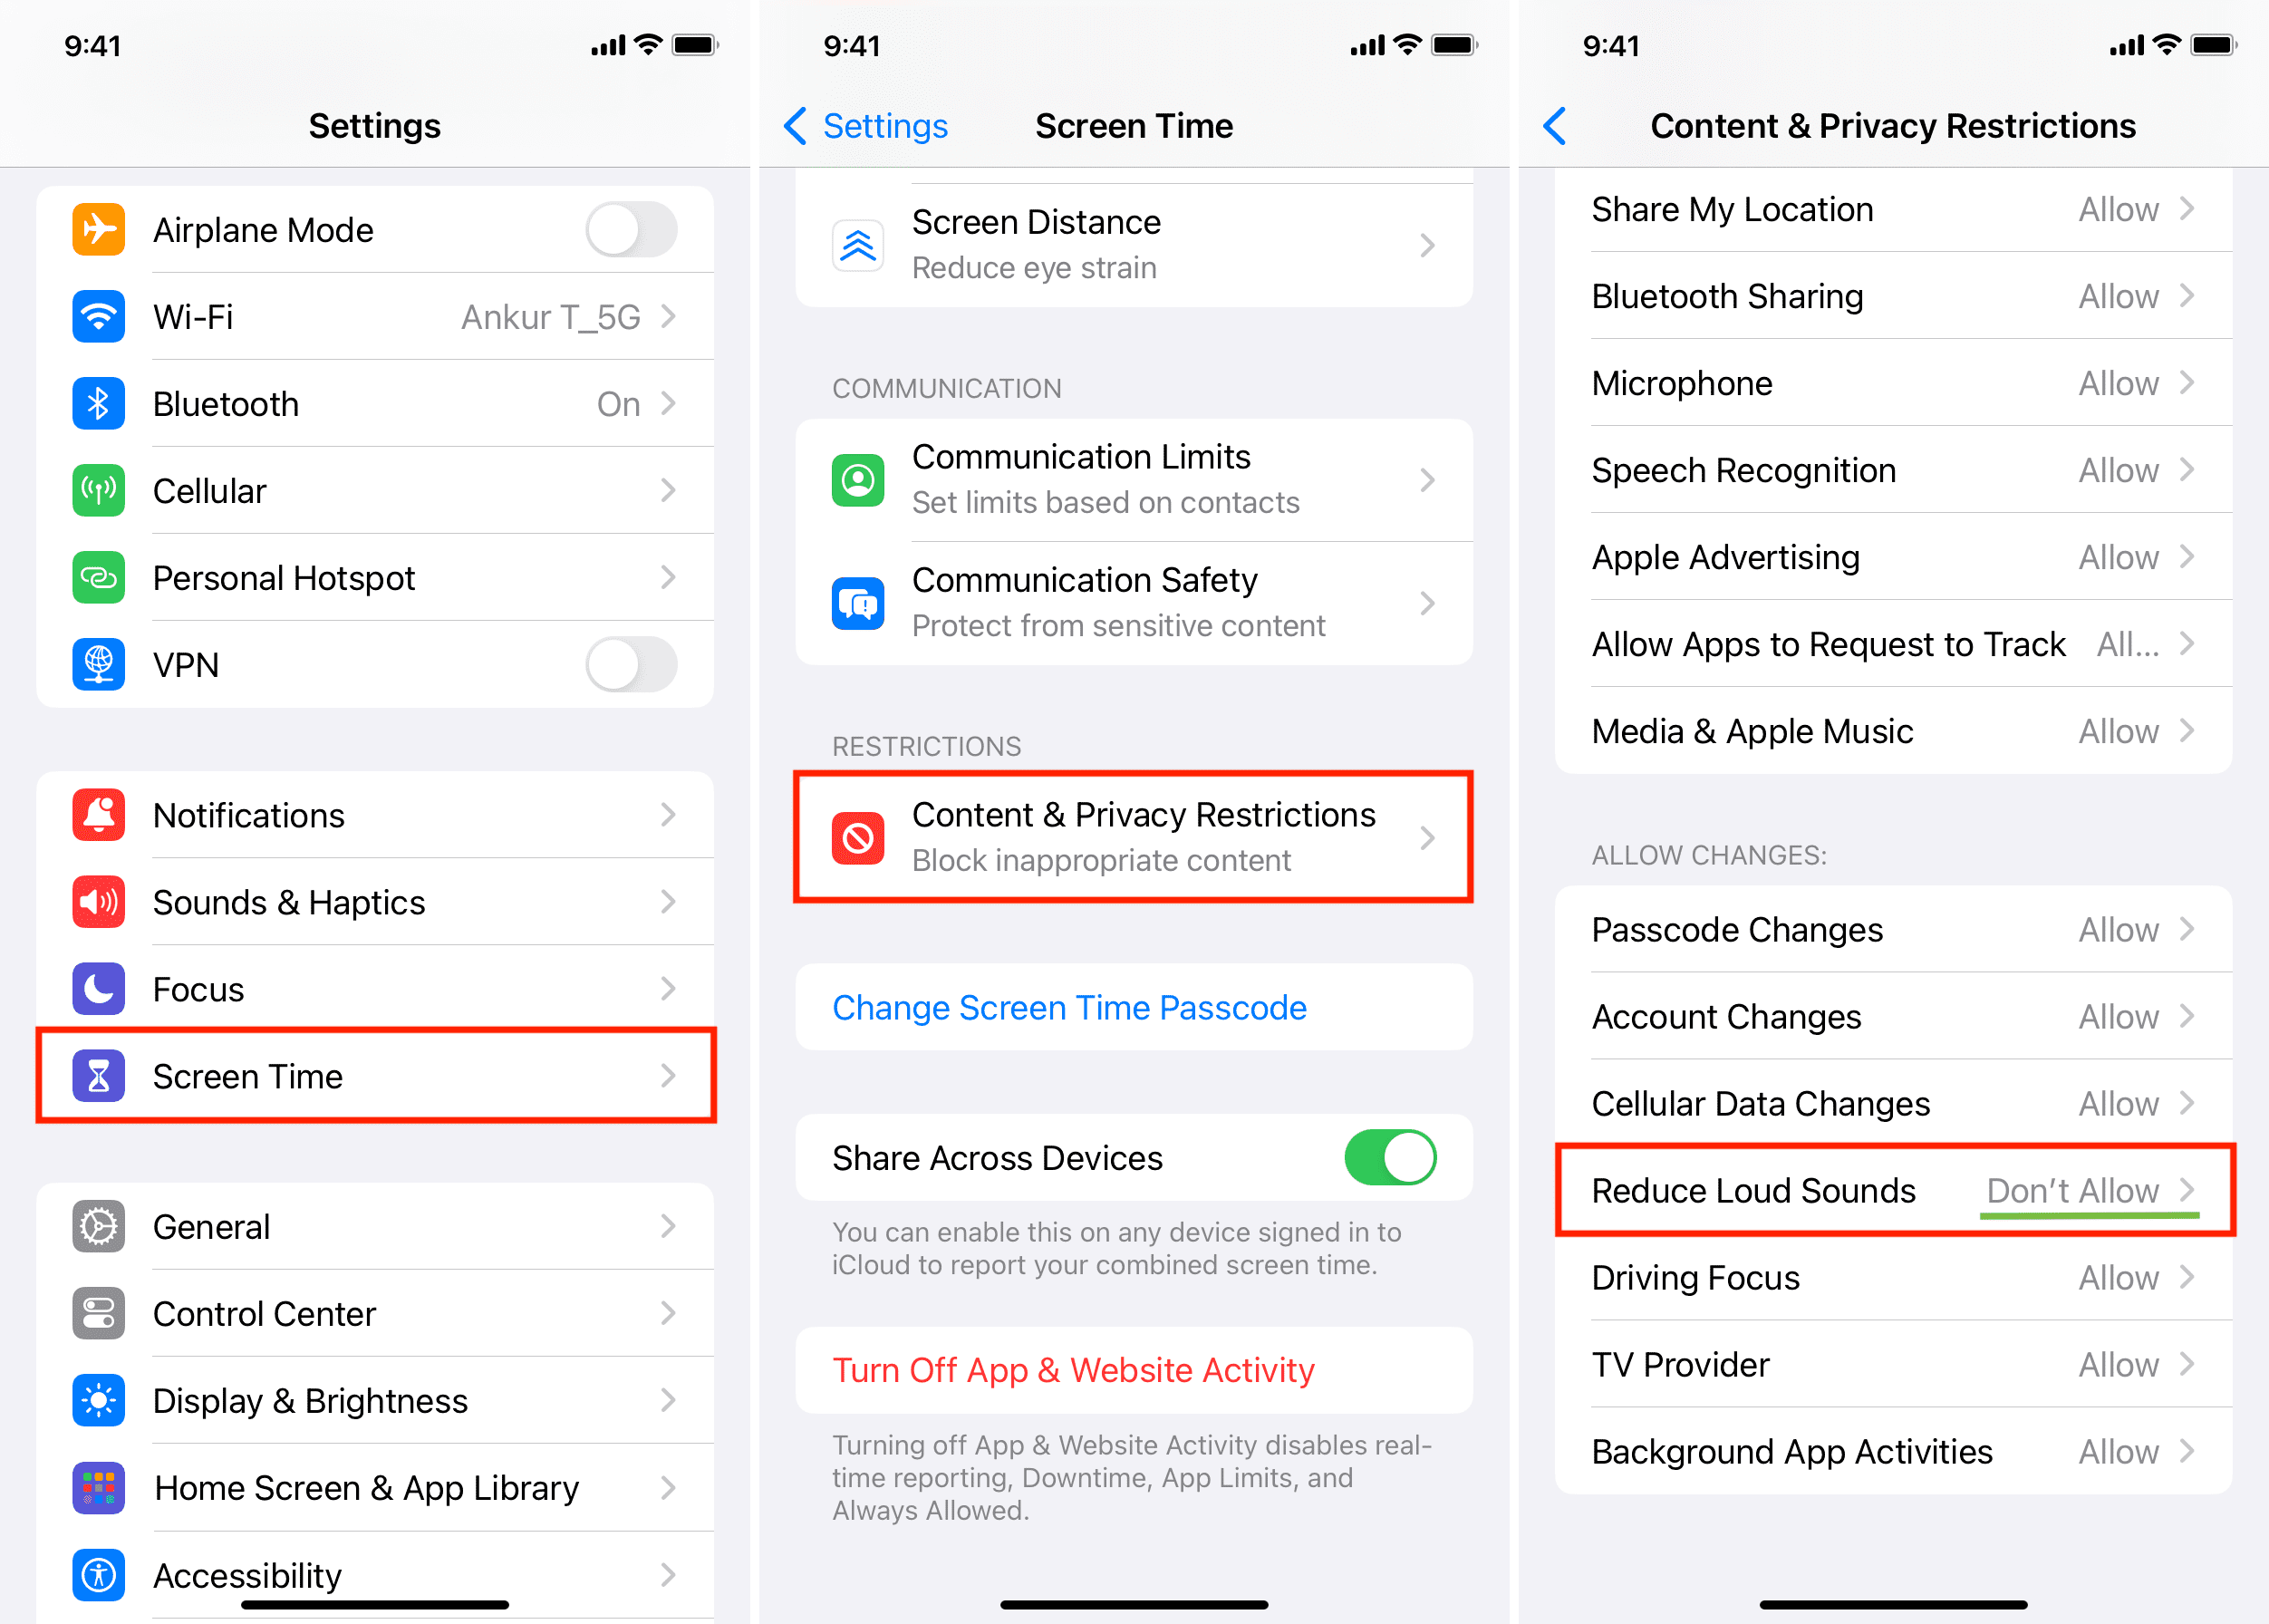 Don't allow Reduce Loud Sounds to change from iPhone Screen Time settings